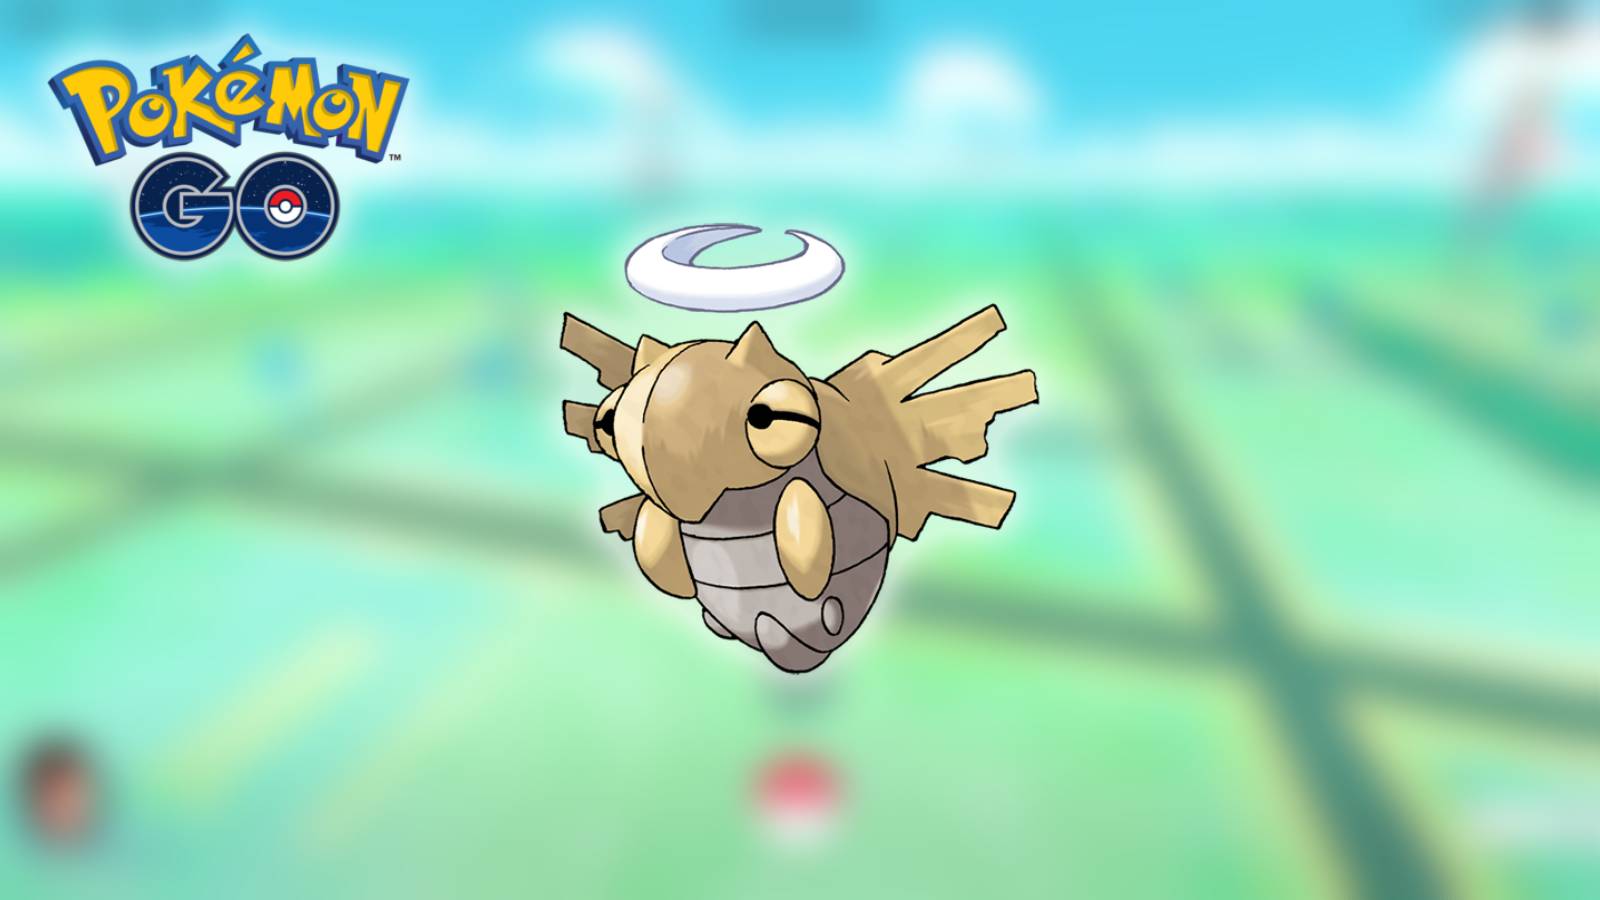 The Pokemon Shedinja appears against a blurred background